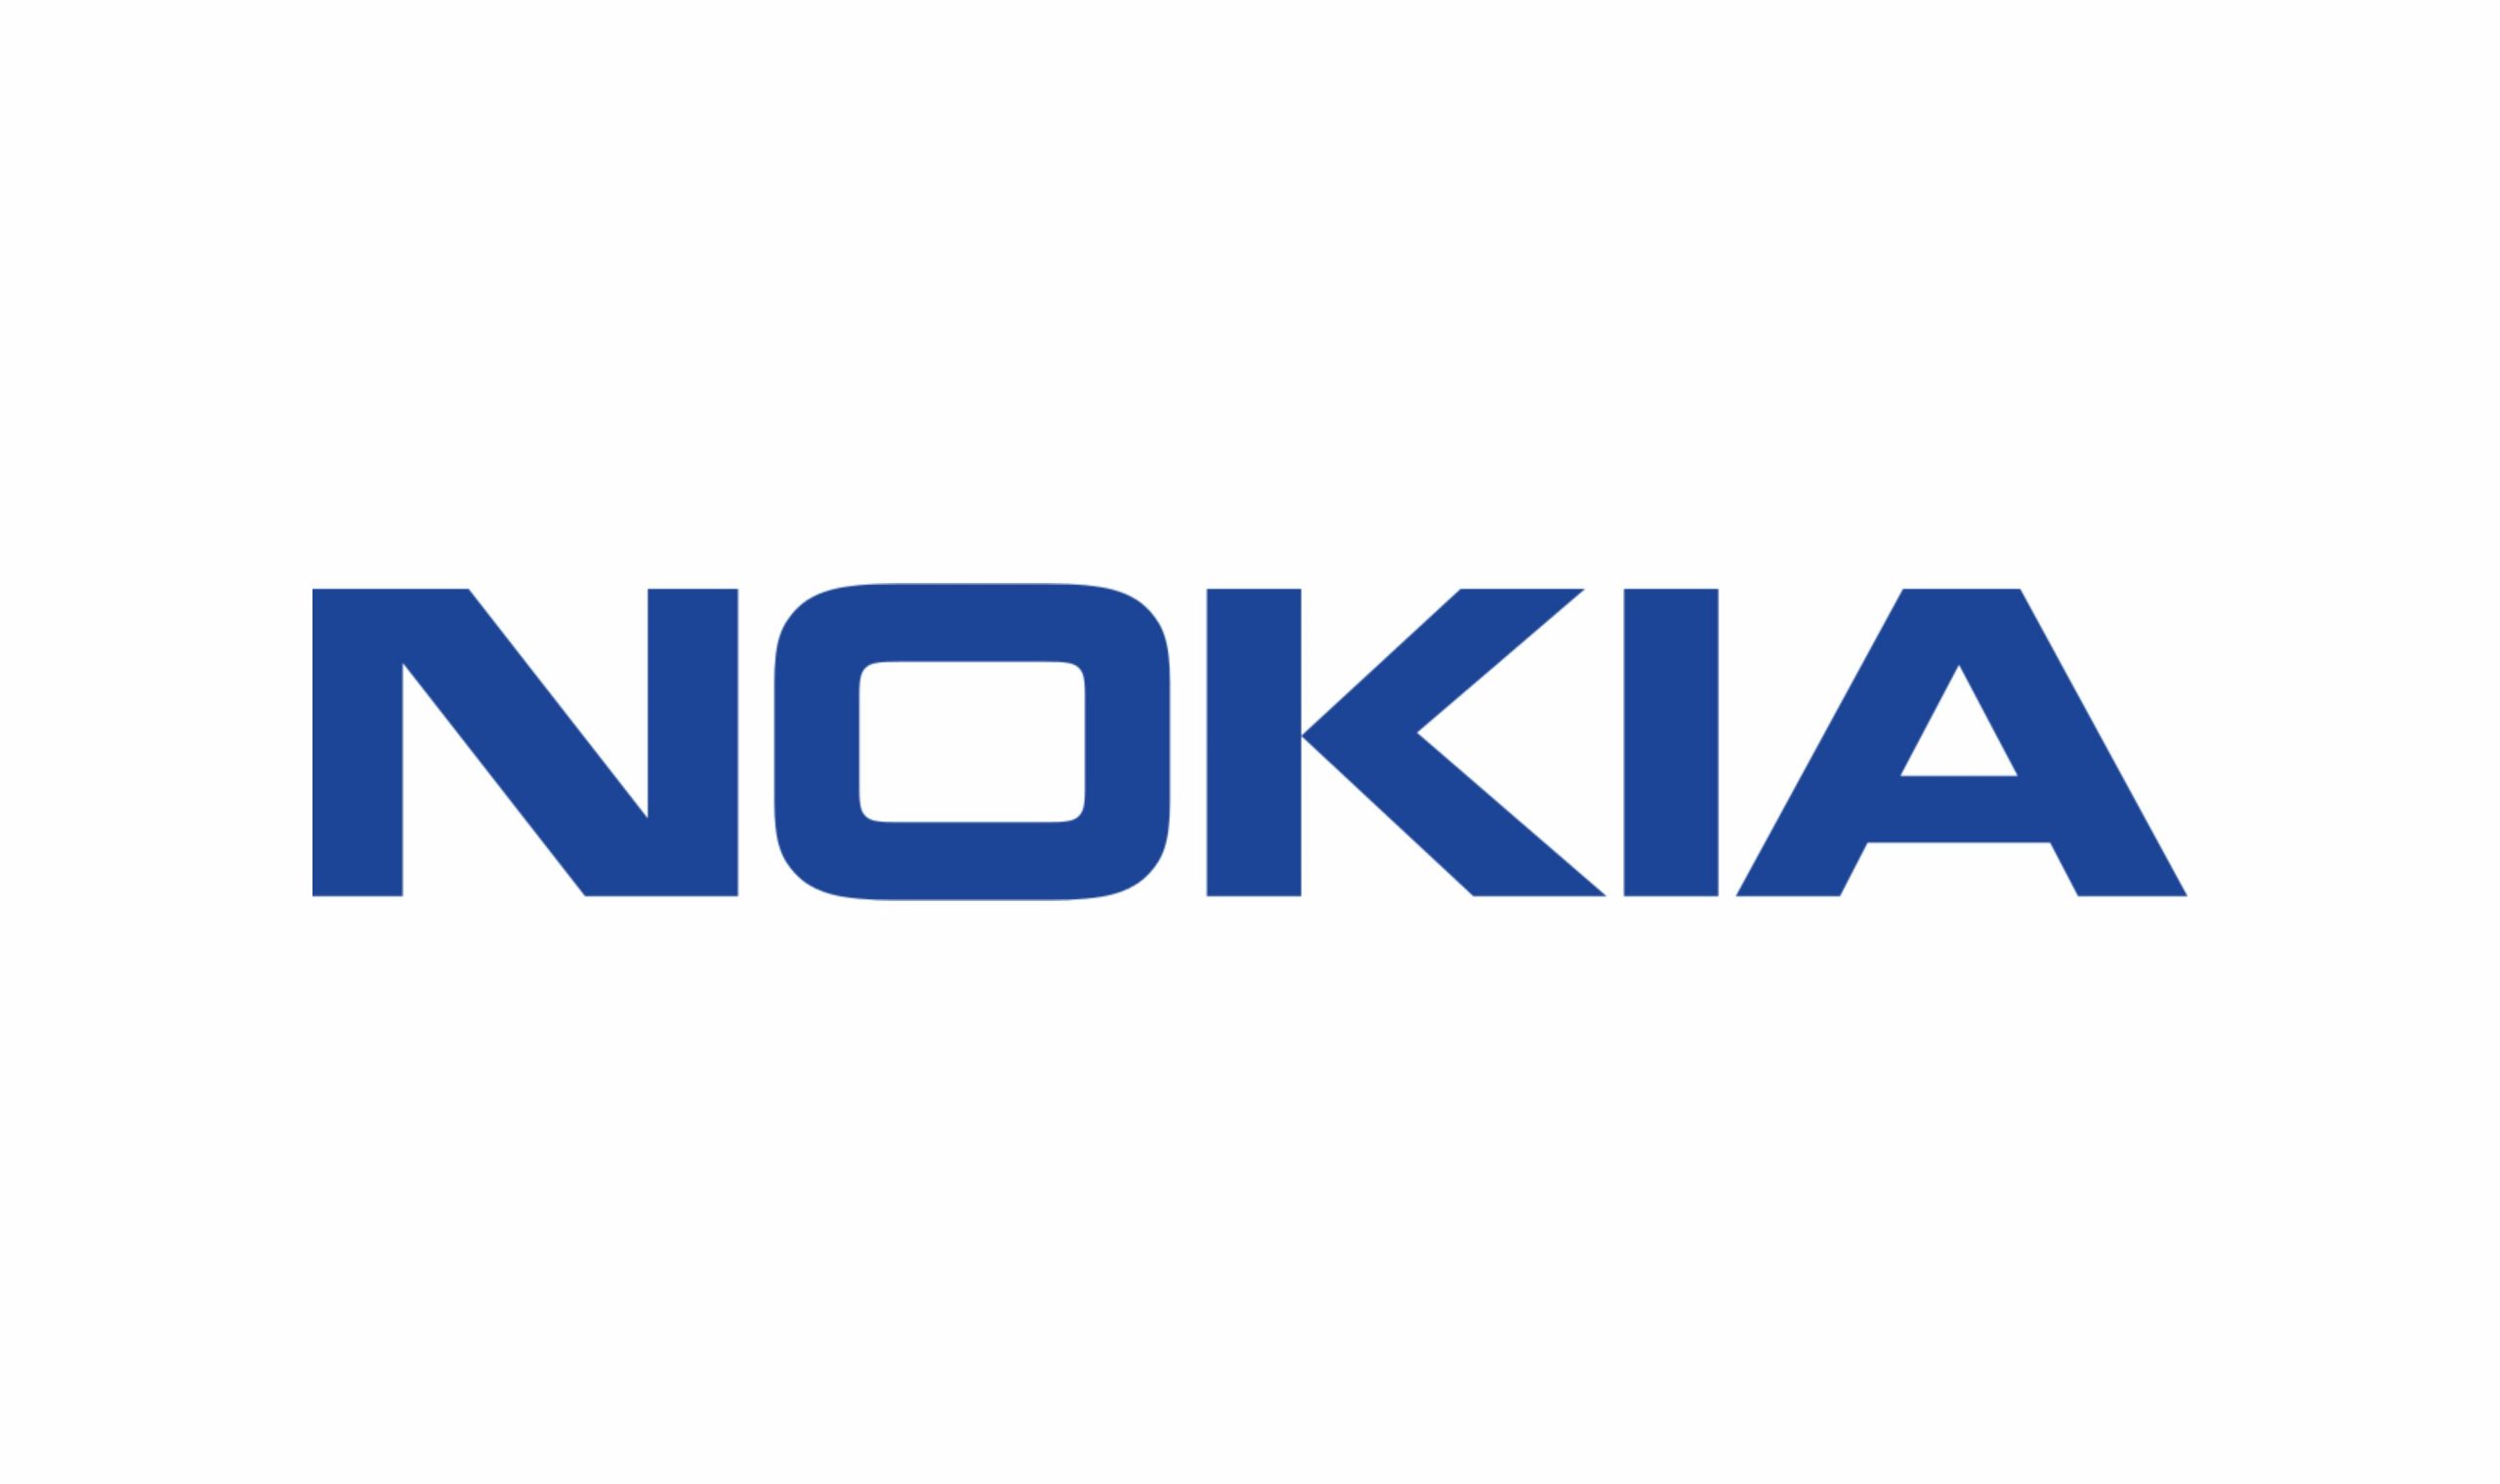 Nokia was the 15th largest smartphone brand in Q4 2020 with a mere 0.7% market share